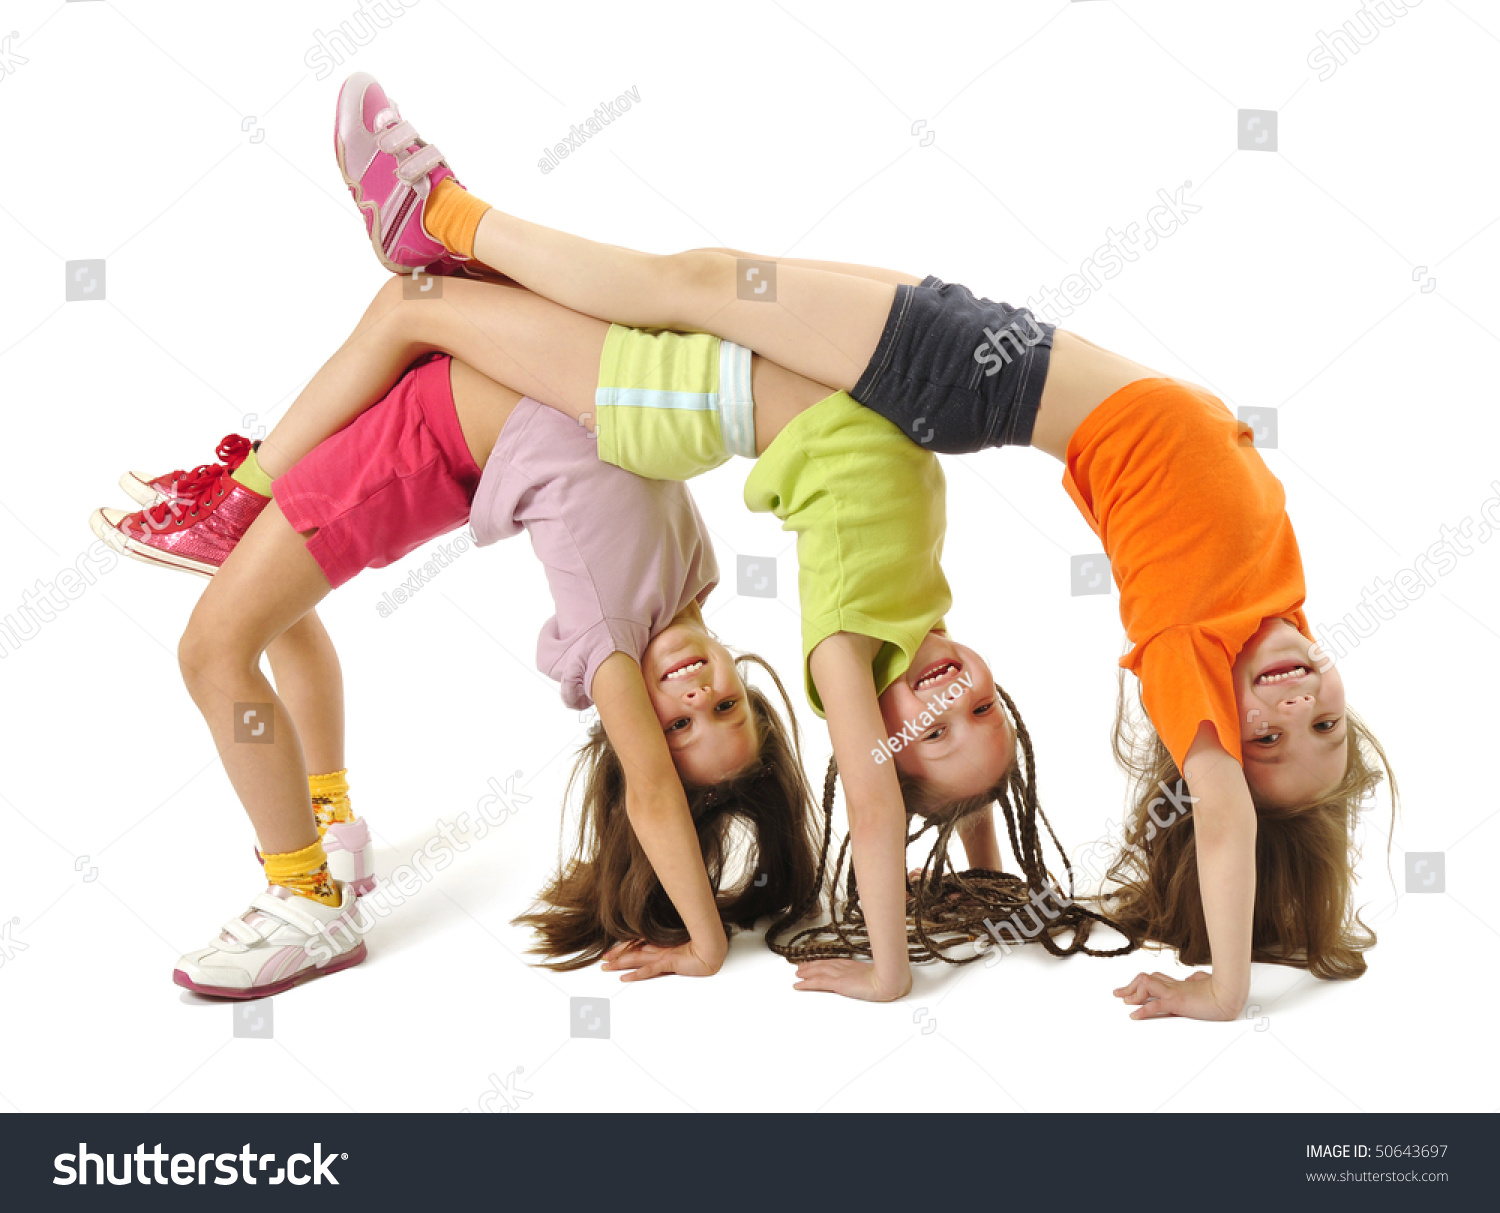 Little Girls Standing On Her Arms Stock Photo 50643697 : Shutterstock